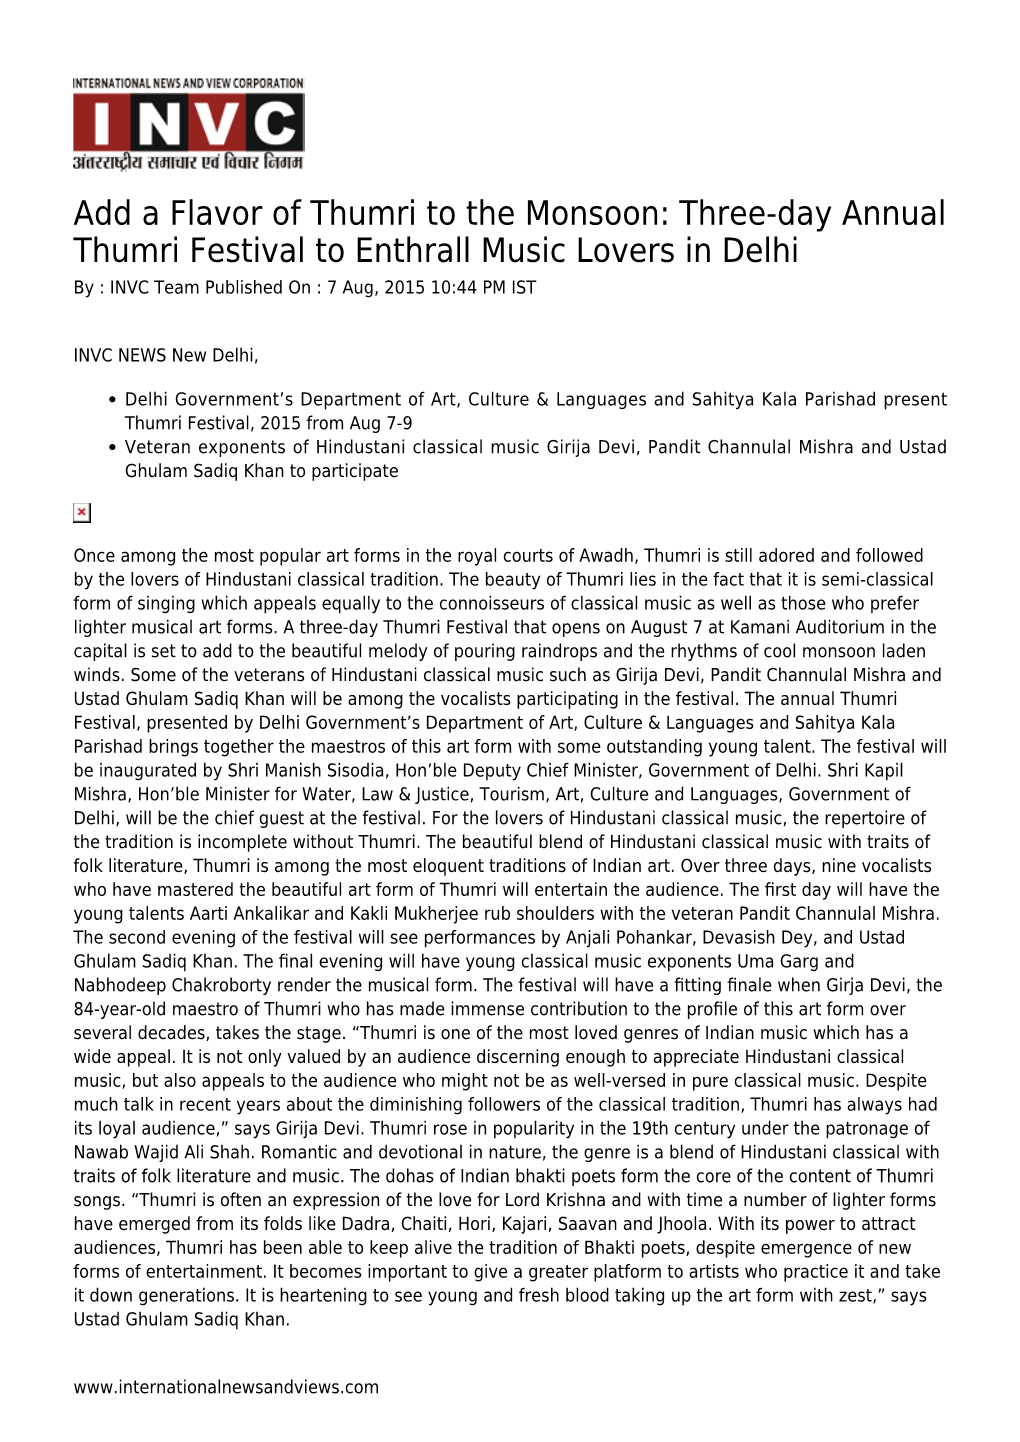 Add a Flavor of Thumri to the Monsoon: Three-Day Annual Thumri Festival to Enthrall Music Lovers in Delhi by : INVC Team Published on : 7 Aug, 2015 10:44 PM IST